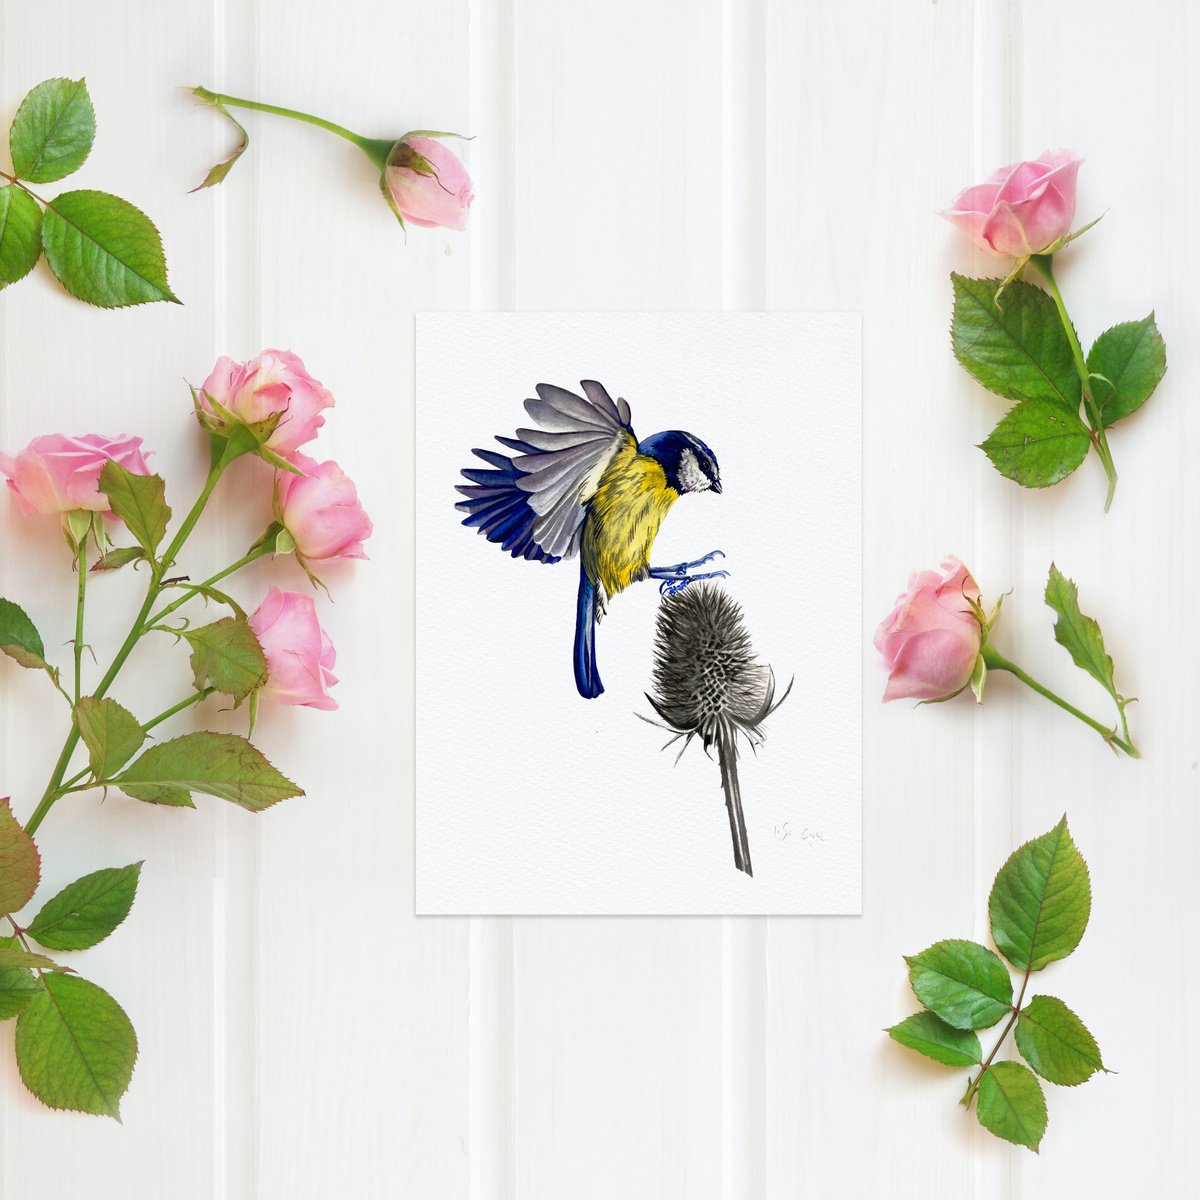 Blue Tit And Thistle by Irsa Ervin